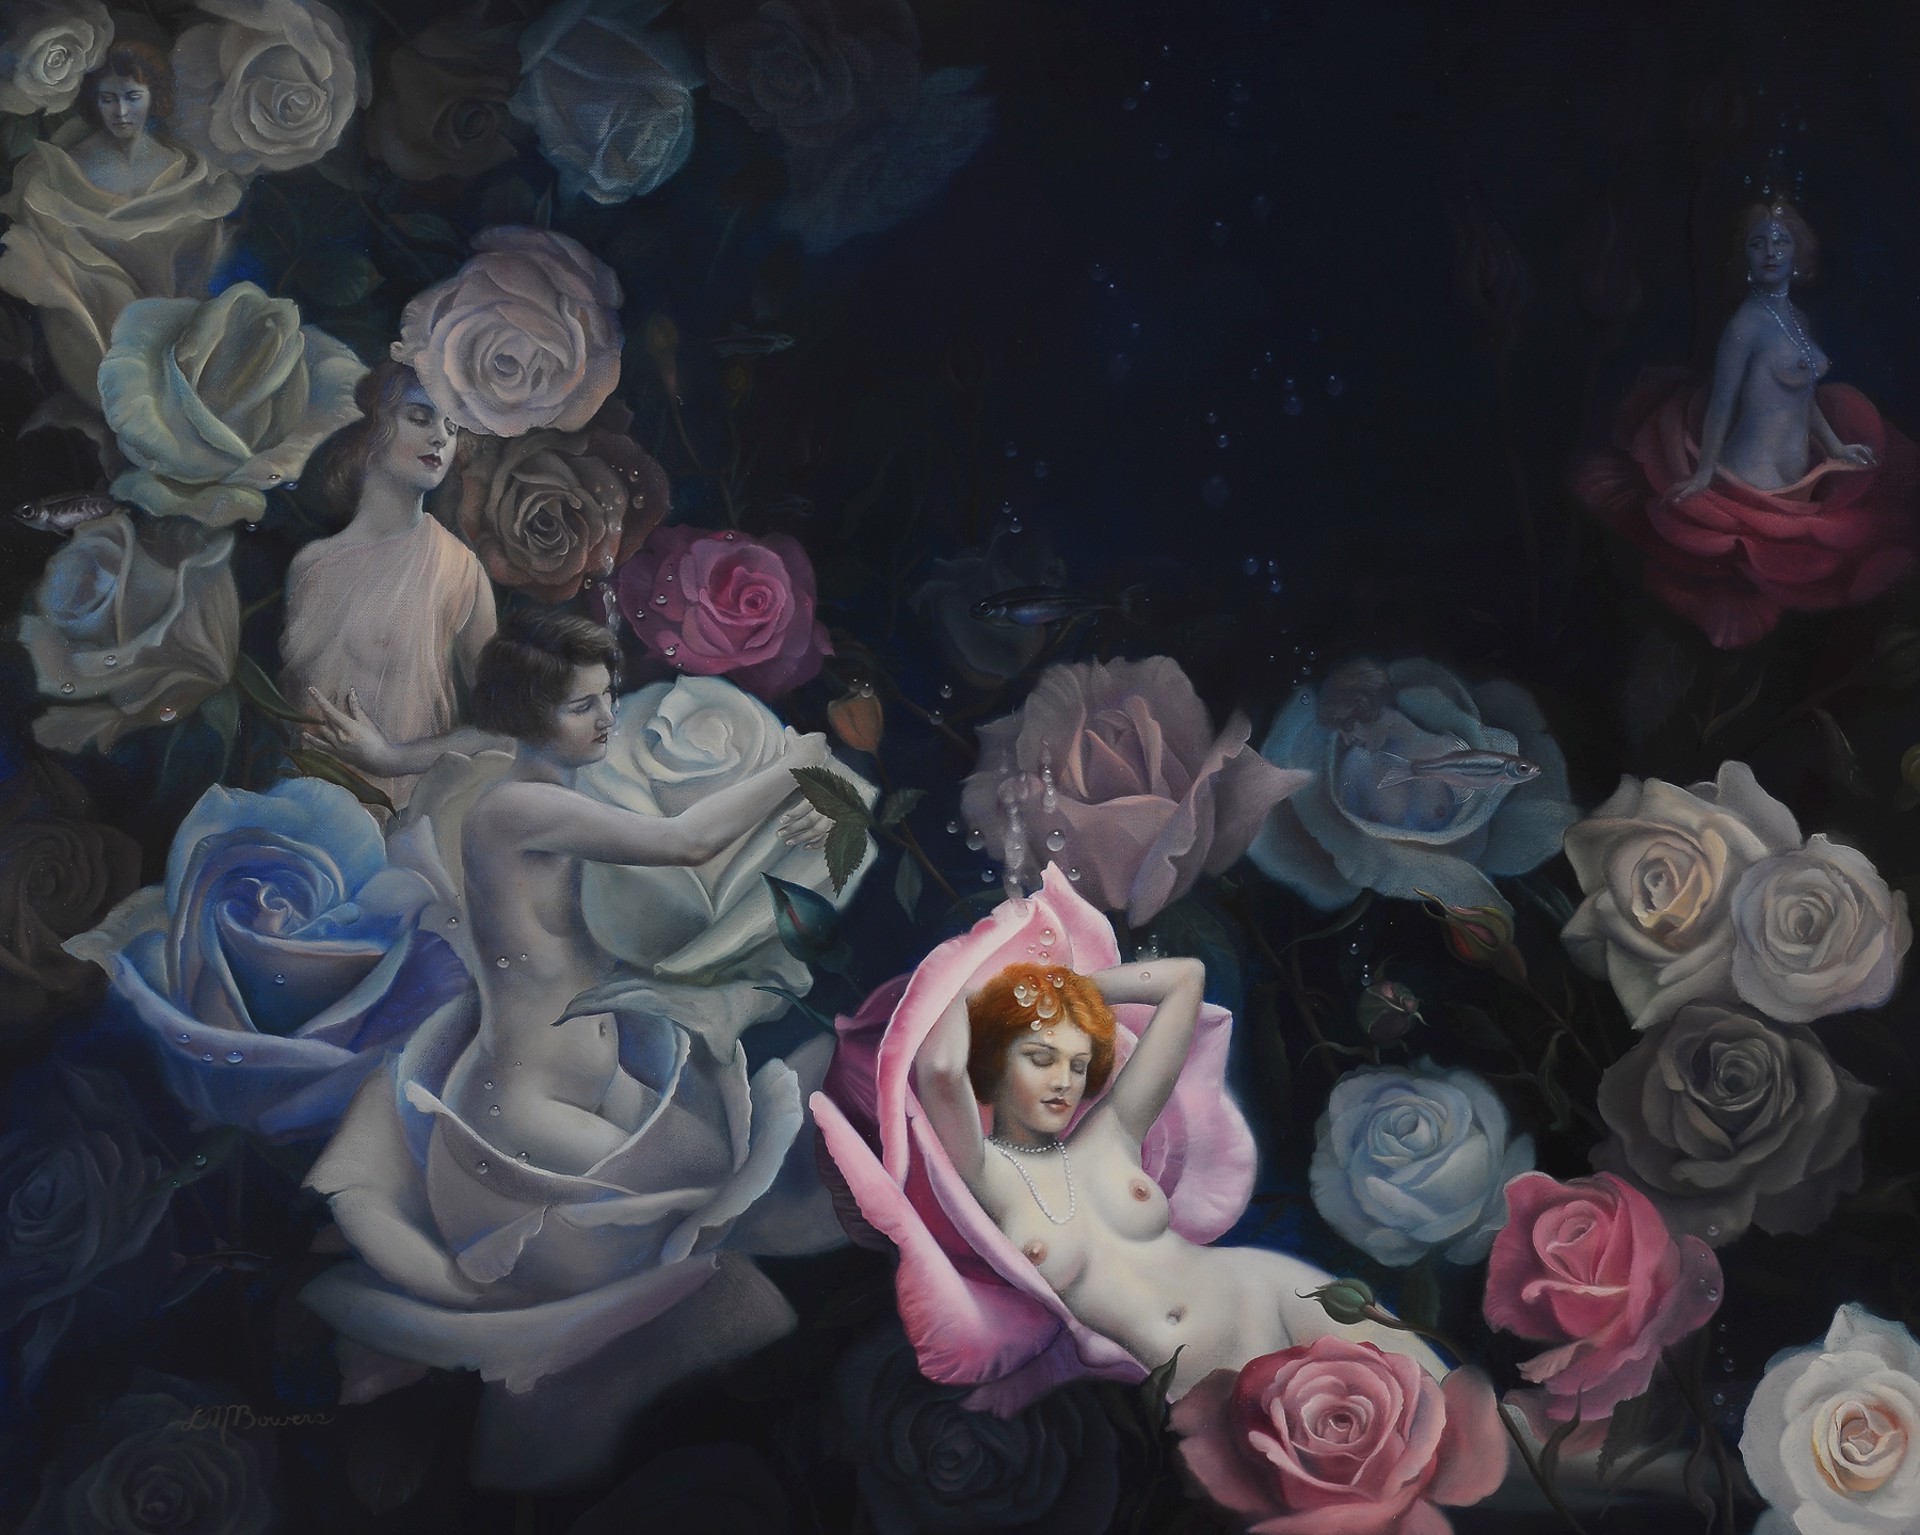 Girls & Roses by David Michael Bowers